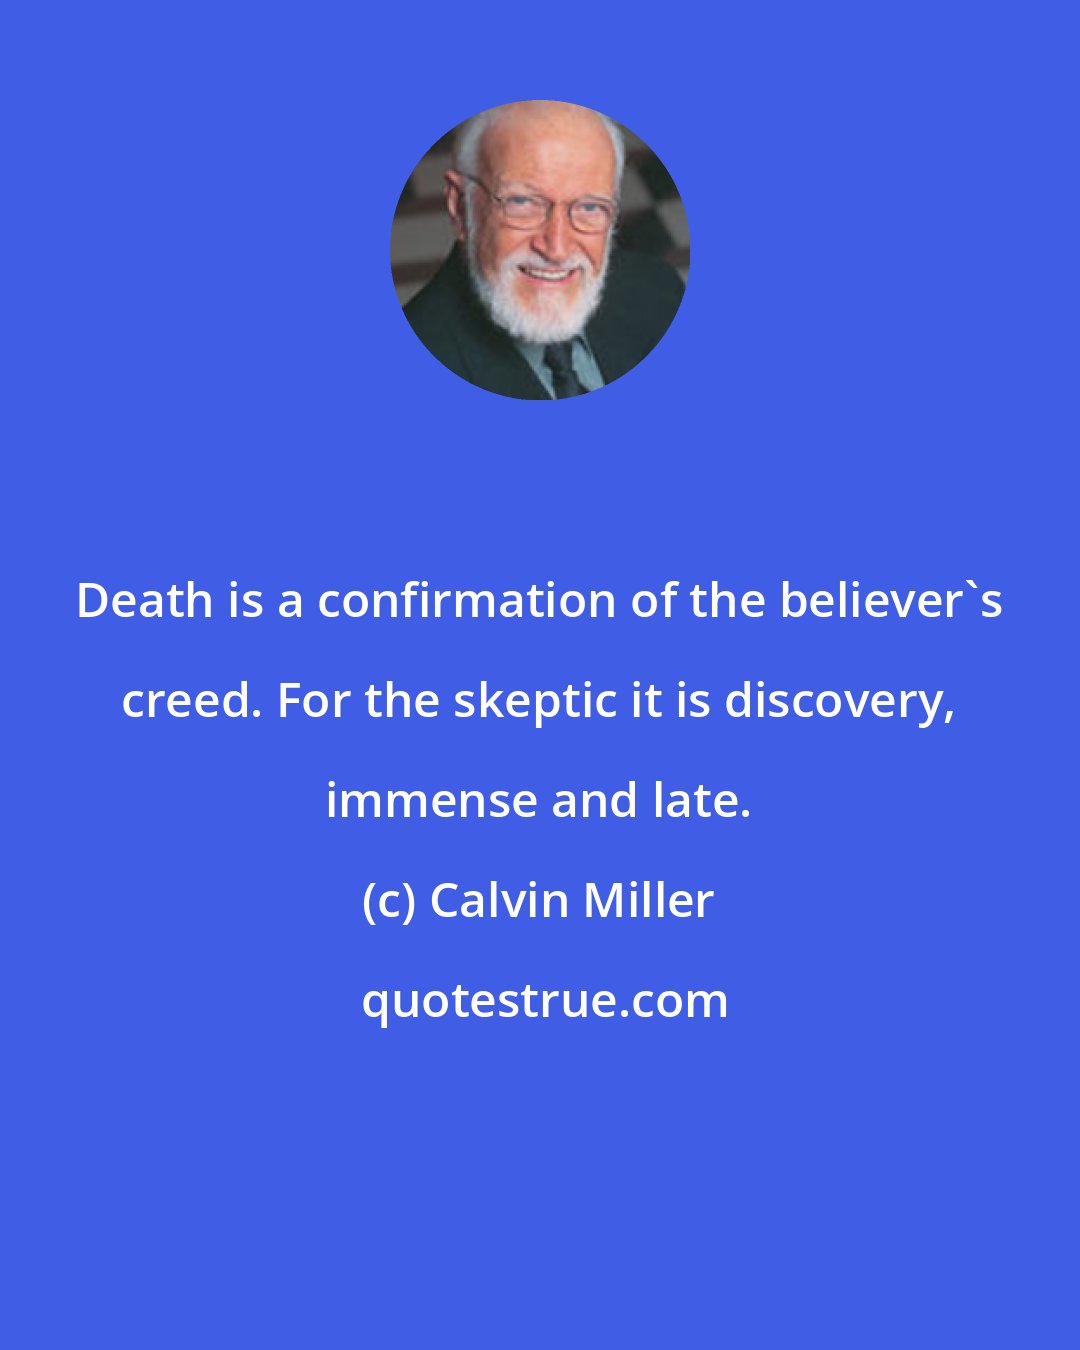 Calvin Miller: Death is a confirmation of the believer's creed. For the skeptic it is discovery, immense and late.